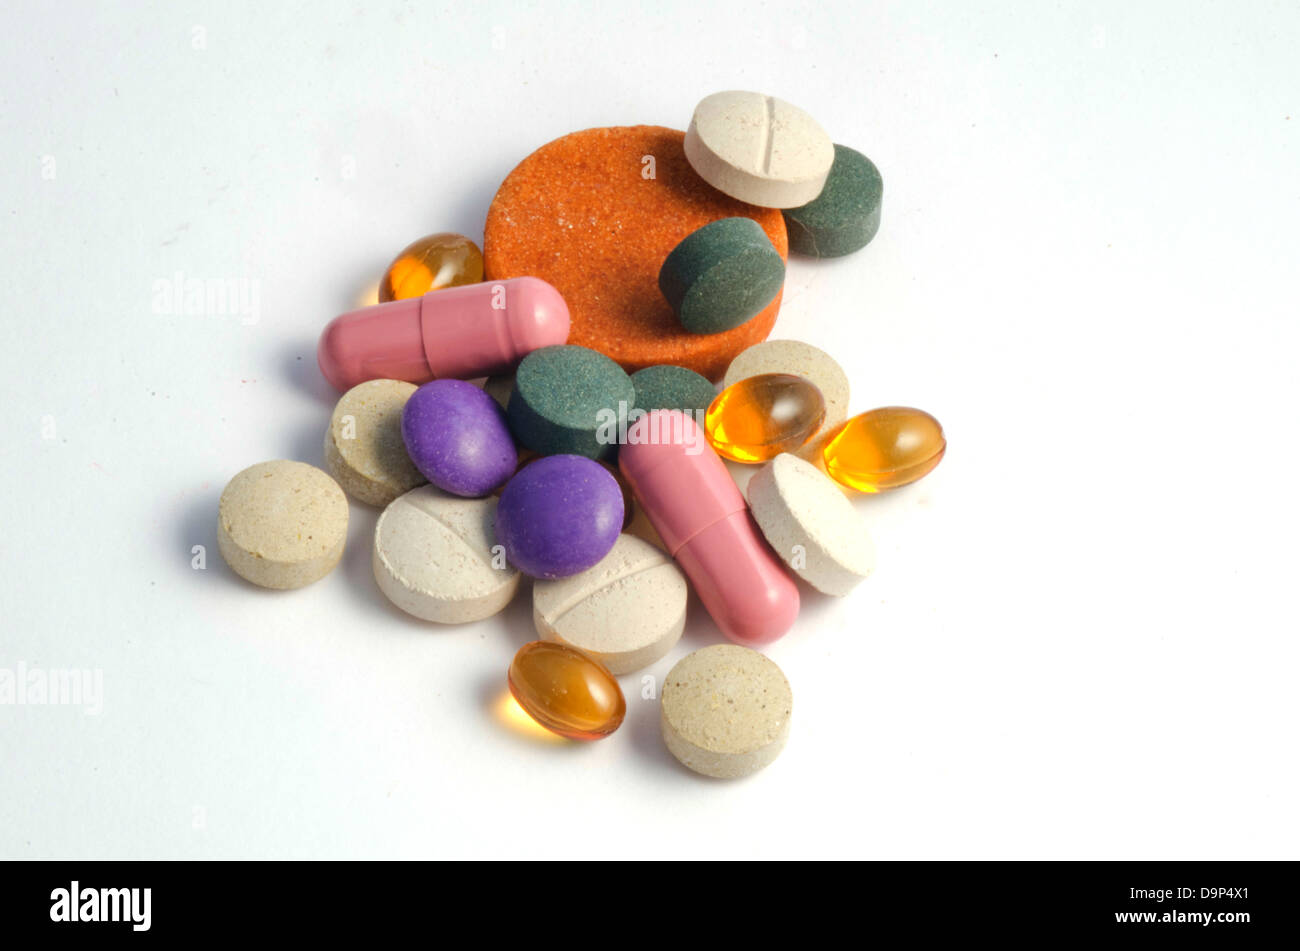 Medical health remedies, a pile of pills and capsules medication Stock Photo